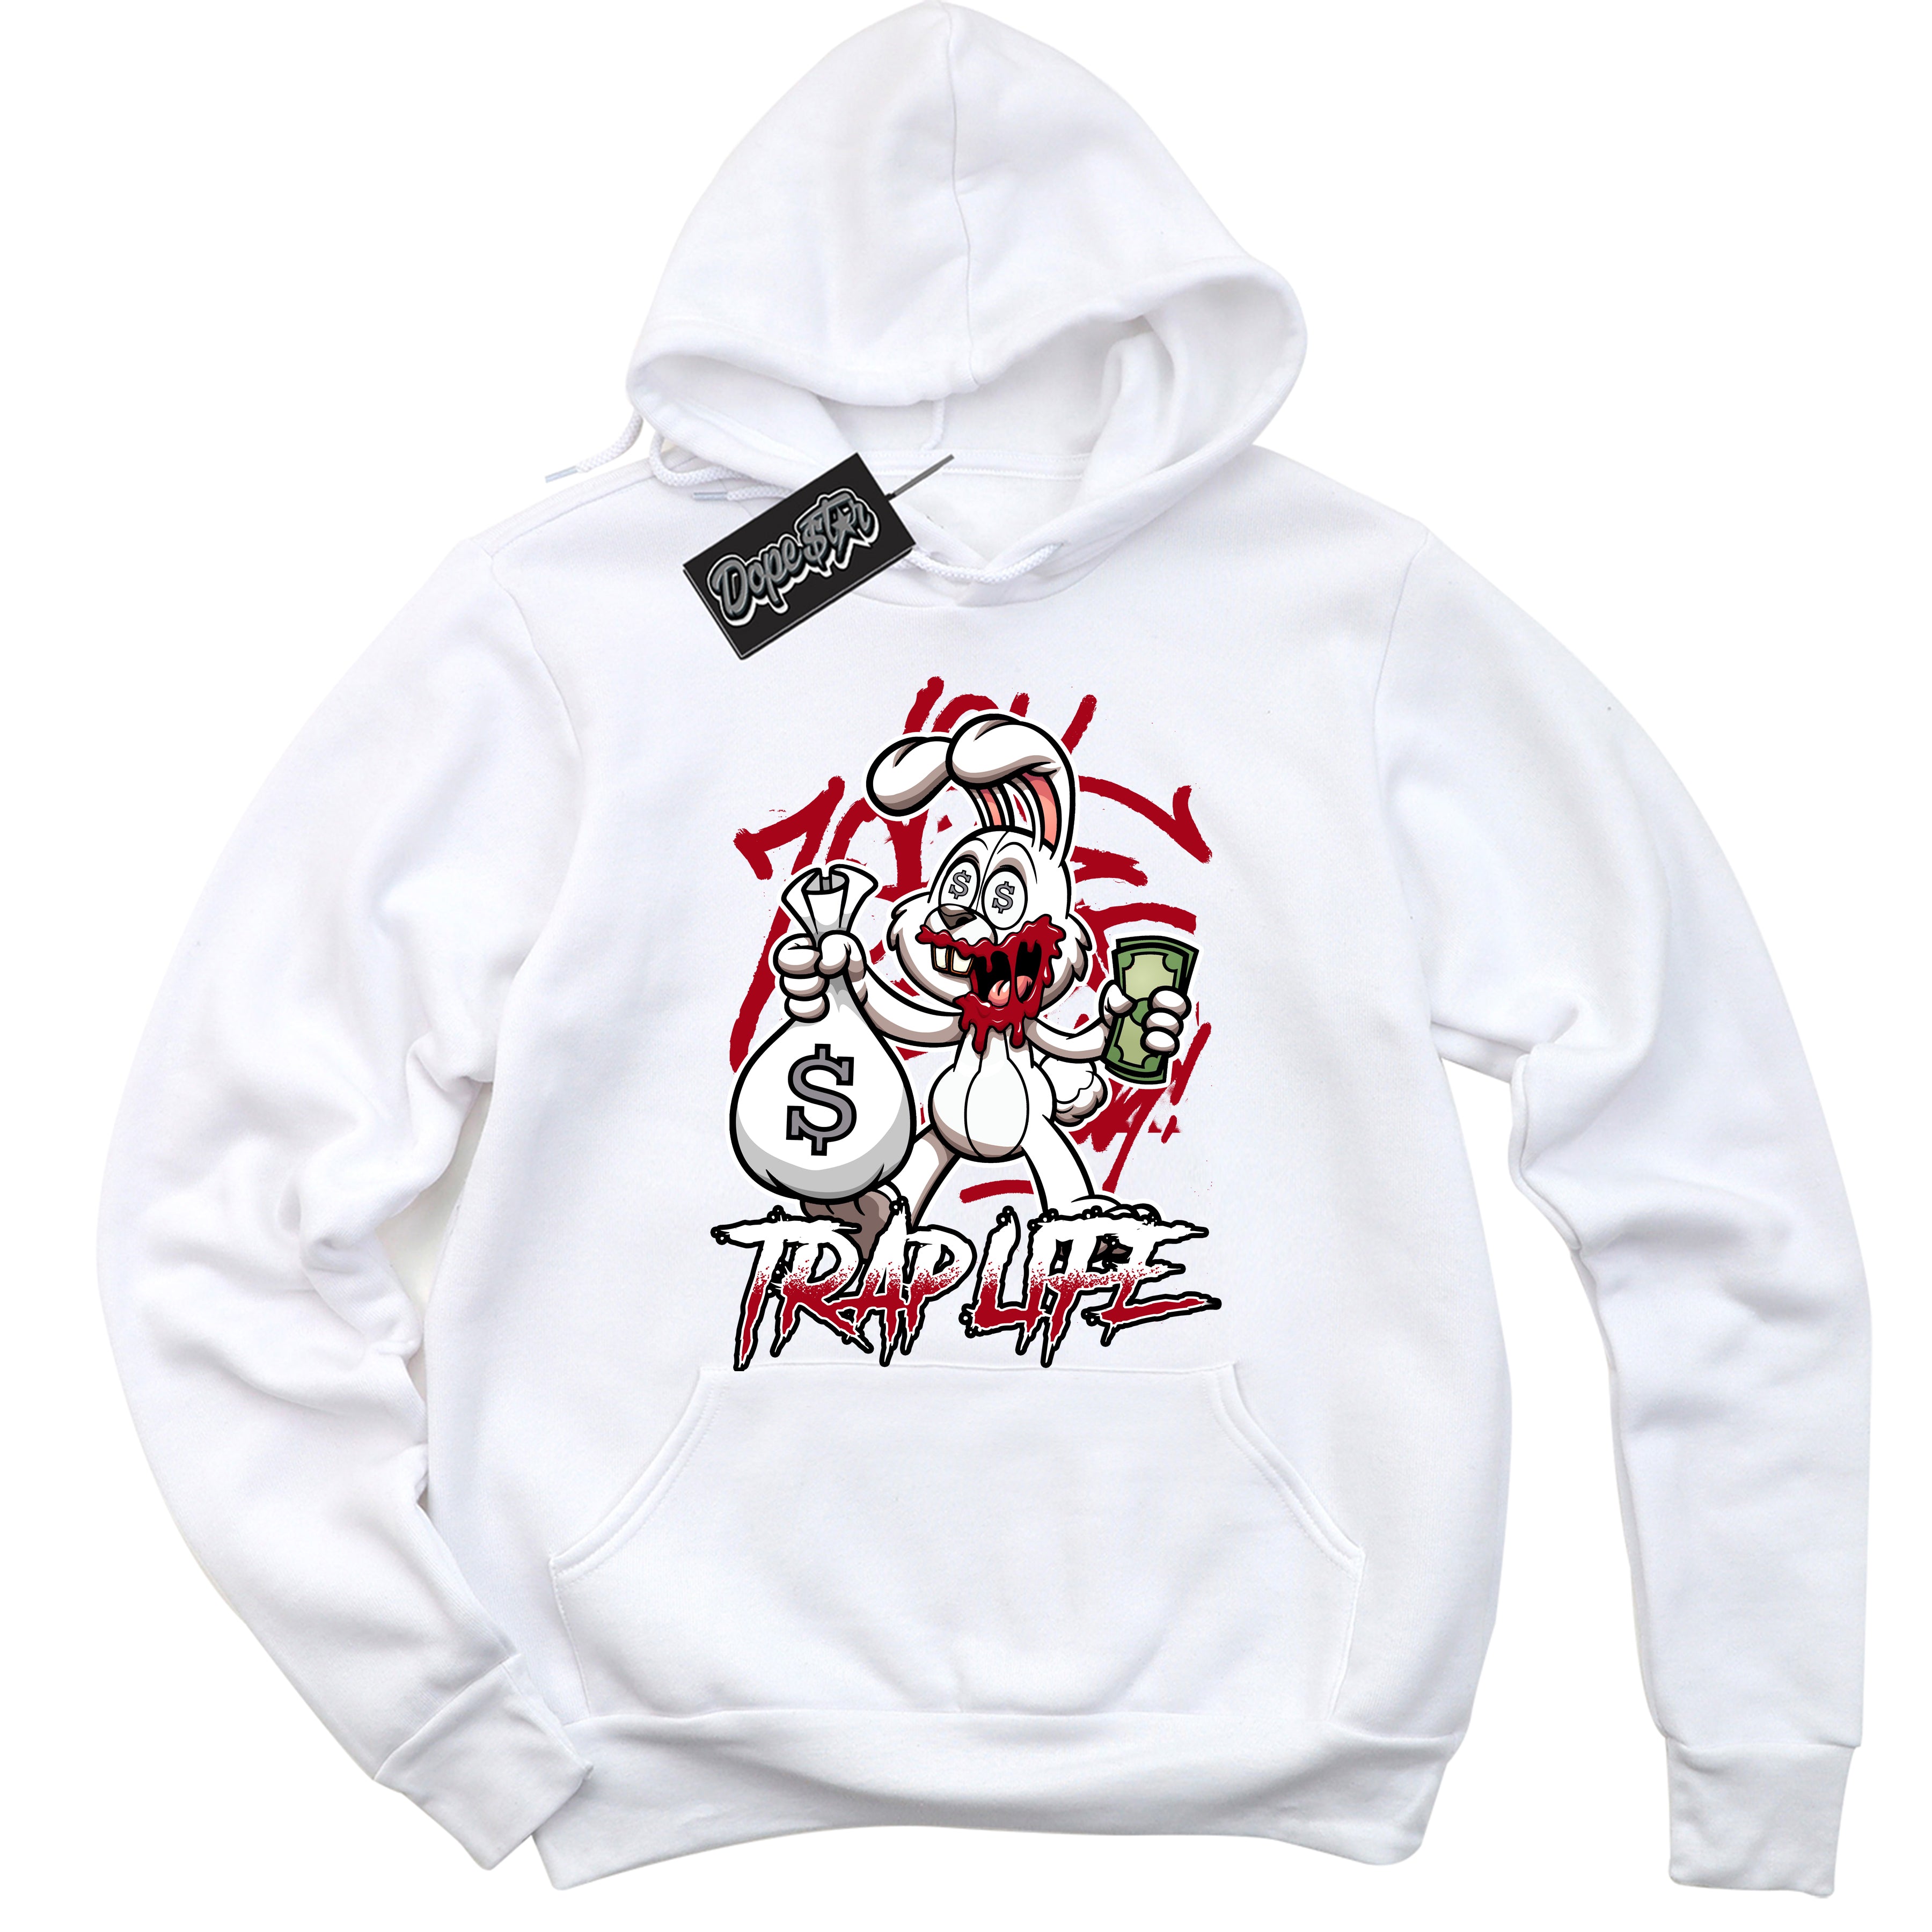 Cool White Hoodie with “ Trap Rabbit ”  design that Perfectly Matches Bred Reimagined 4s Jordans.